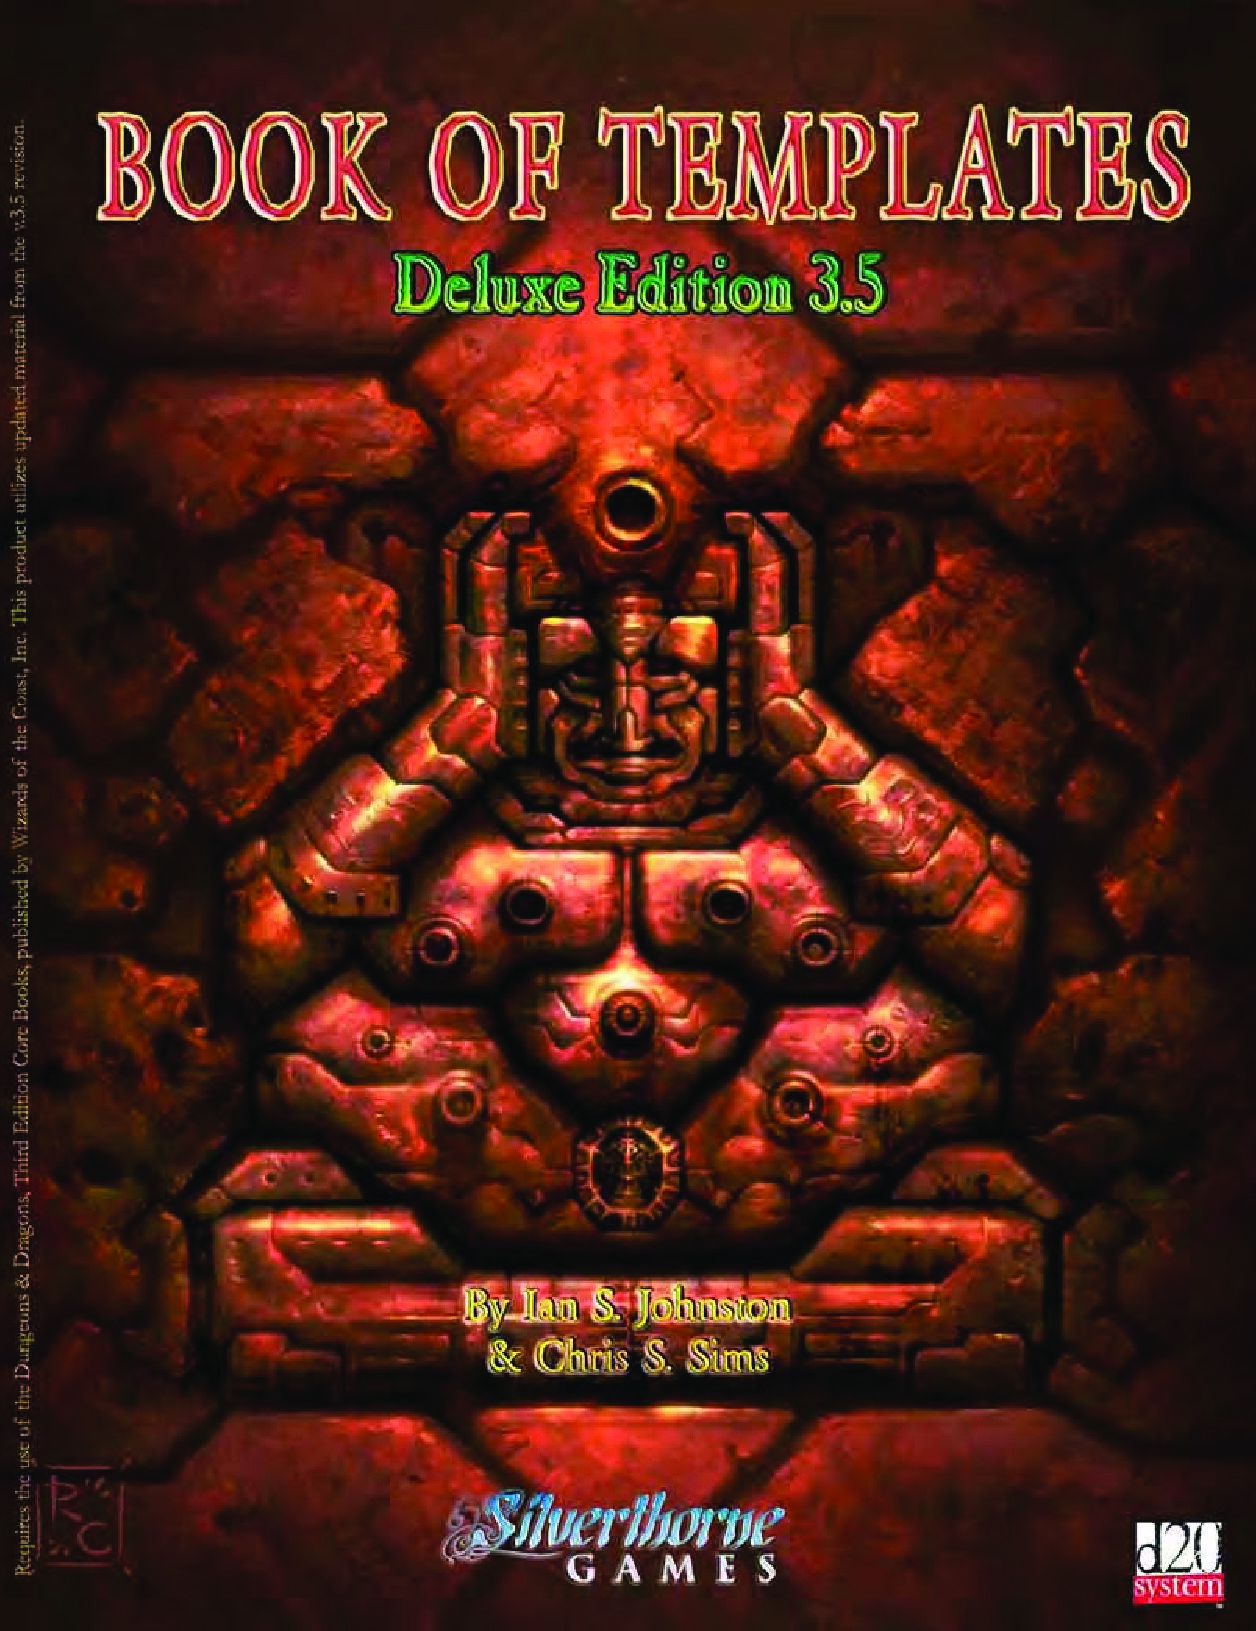 Book of Templates Deluxe Edition 3.5